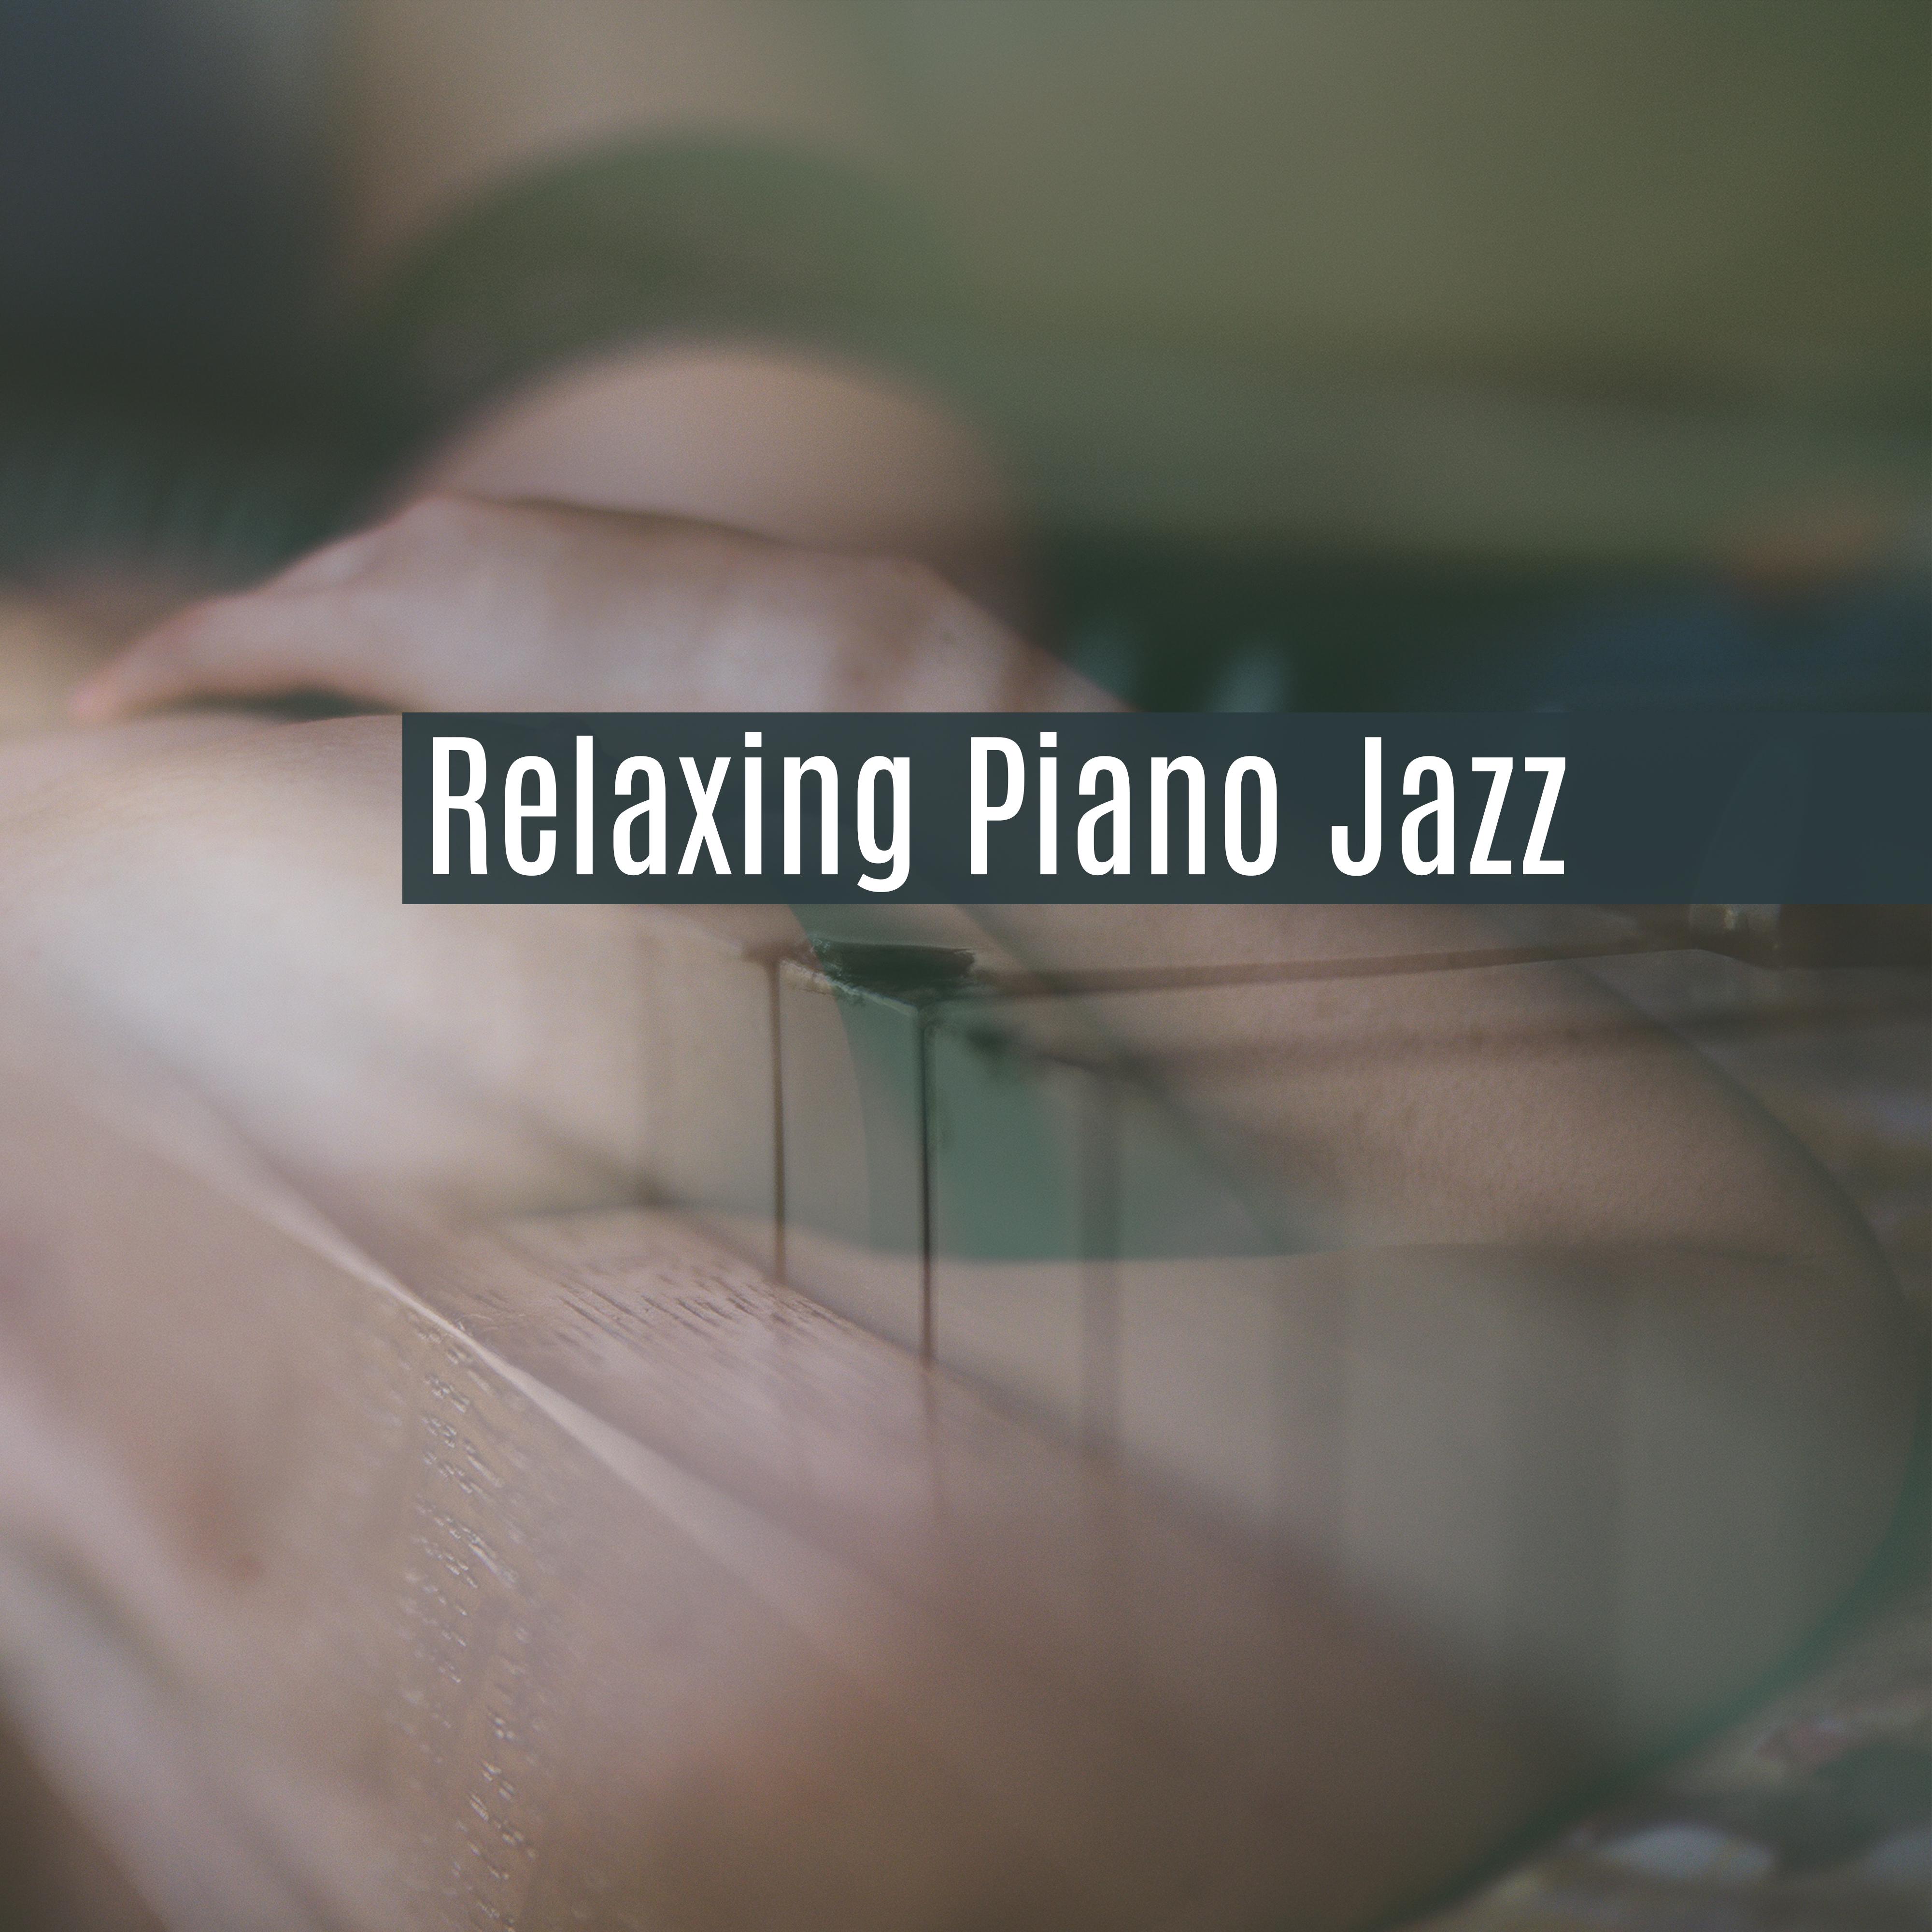 Relaxing Piano Jazz – Sensual Music for Relaxation, Romantic Saxophone, Dinner by Candlelight, Erotic Music, Smooth Jazz